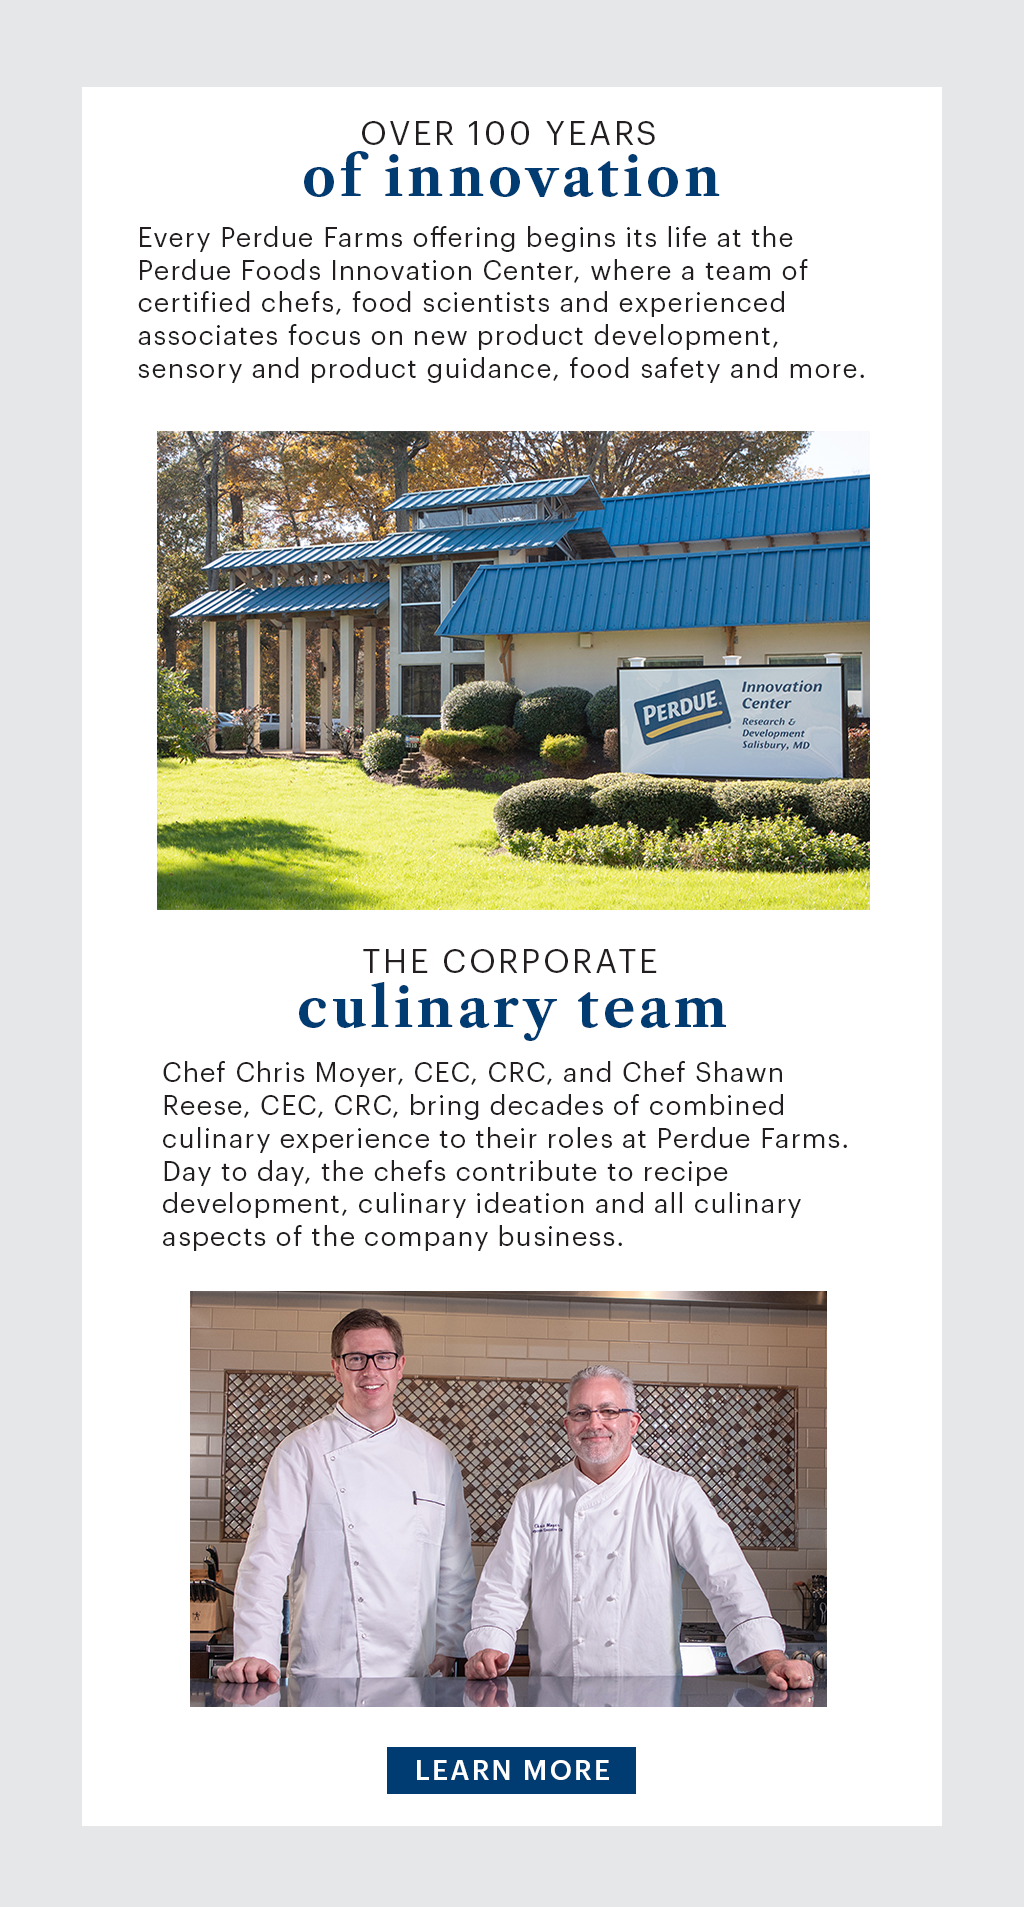 Perdue Innovation Center and Culinary Team